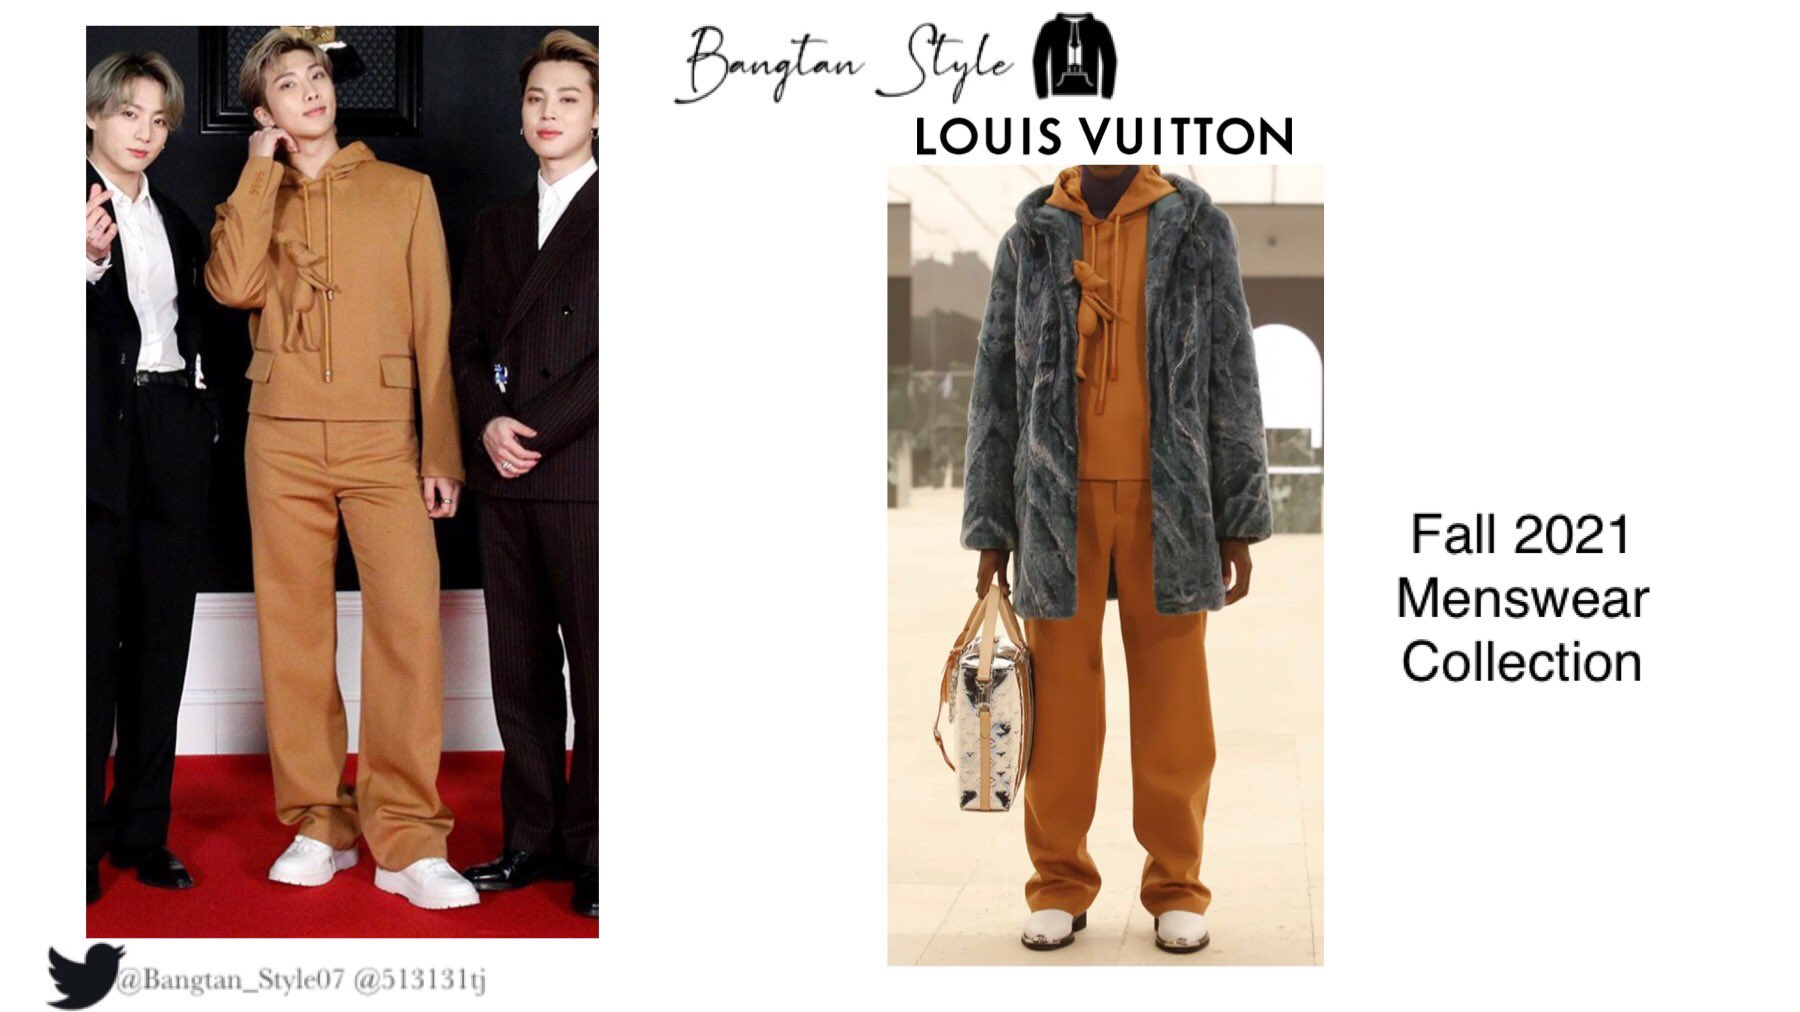 Bangtan Style⁷ (slow) on X: BTS at GRAMMYs 2021 Red Carpet Louis Vuitton  Fall 2021 Menswear Collection #RM #SUGA #JIN #LightltUpBTS  #BTSOurGreatestPrize @BTS_twt  / X